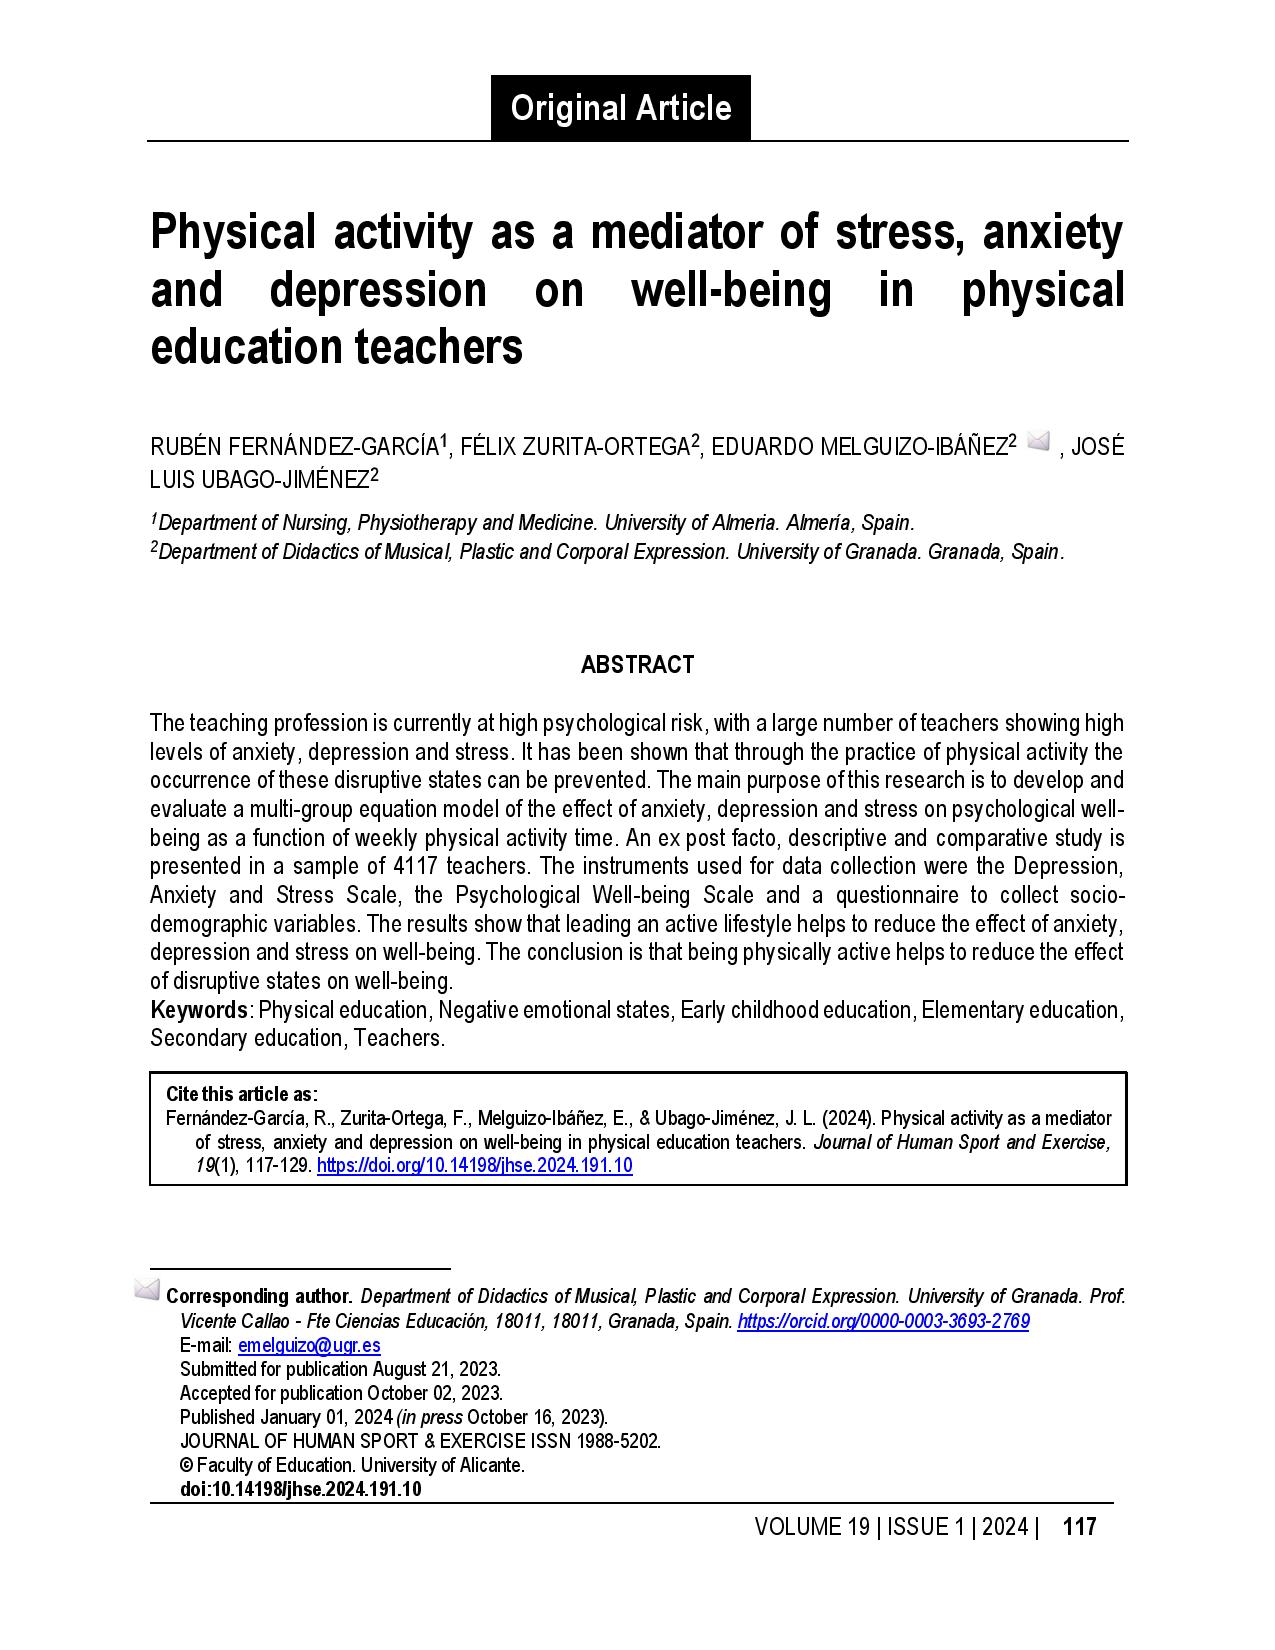 Physical activity as a mediator of stress, anxiety and depression on well-being in physical education teachers